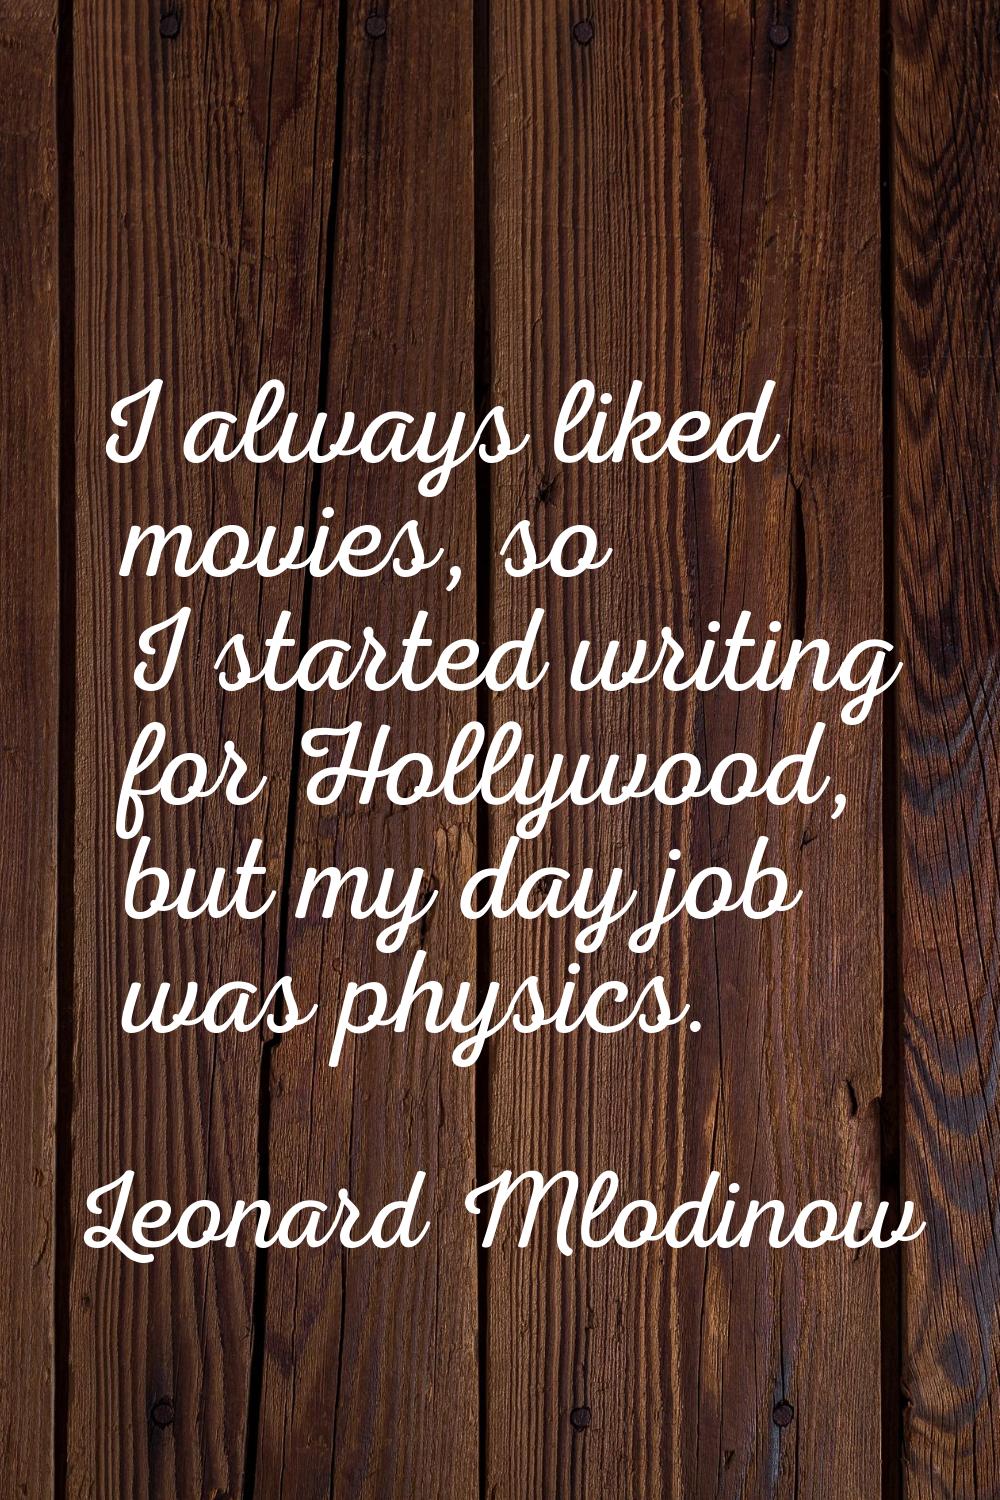 I always liked movies, so I started writing for Hollywood, but my day job was physics.